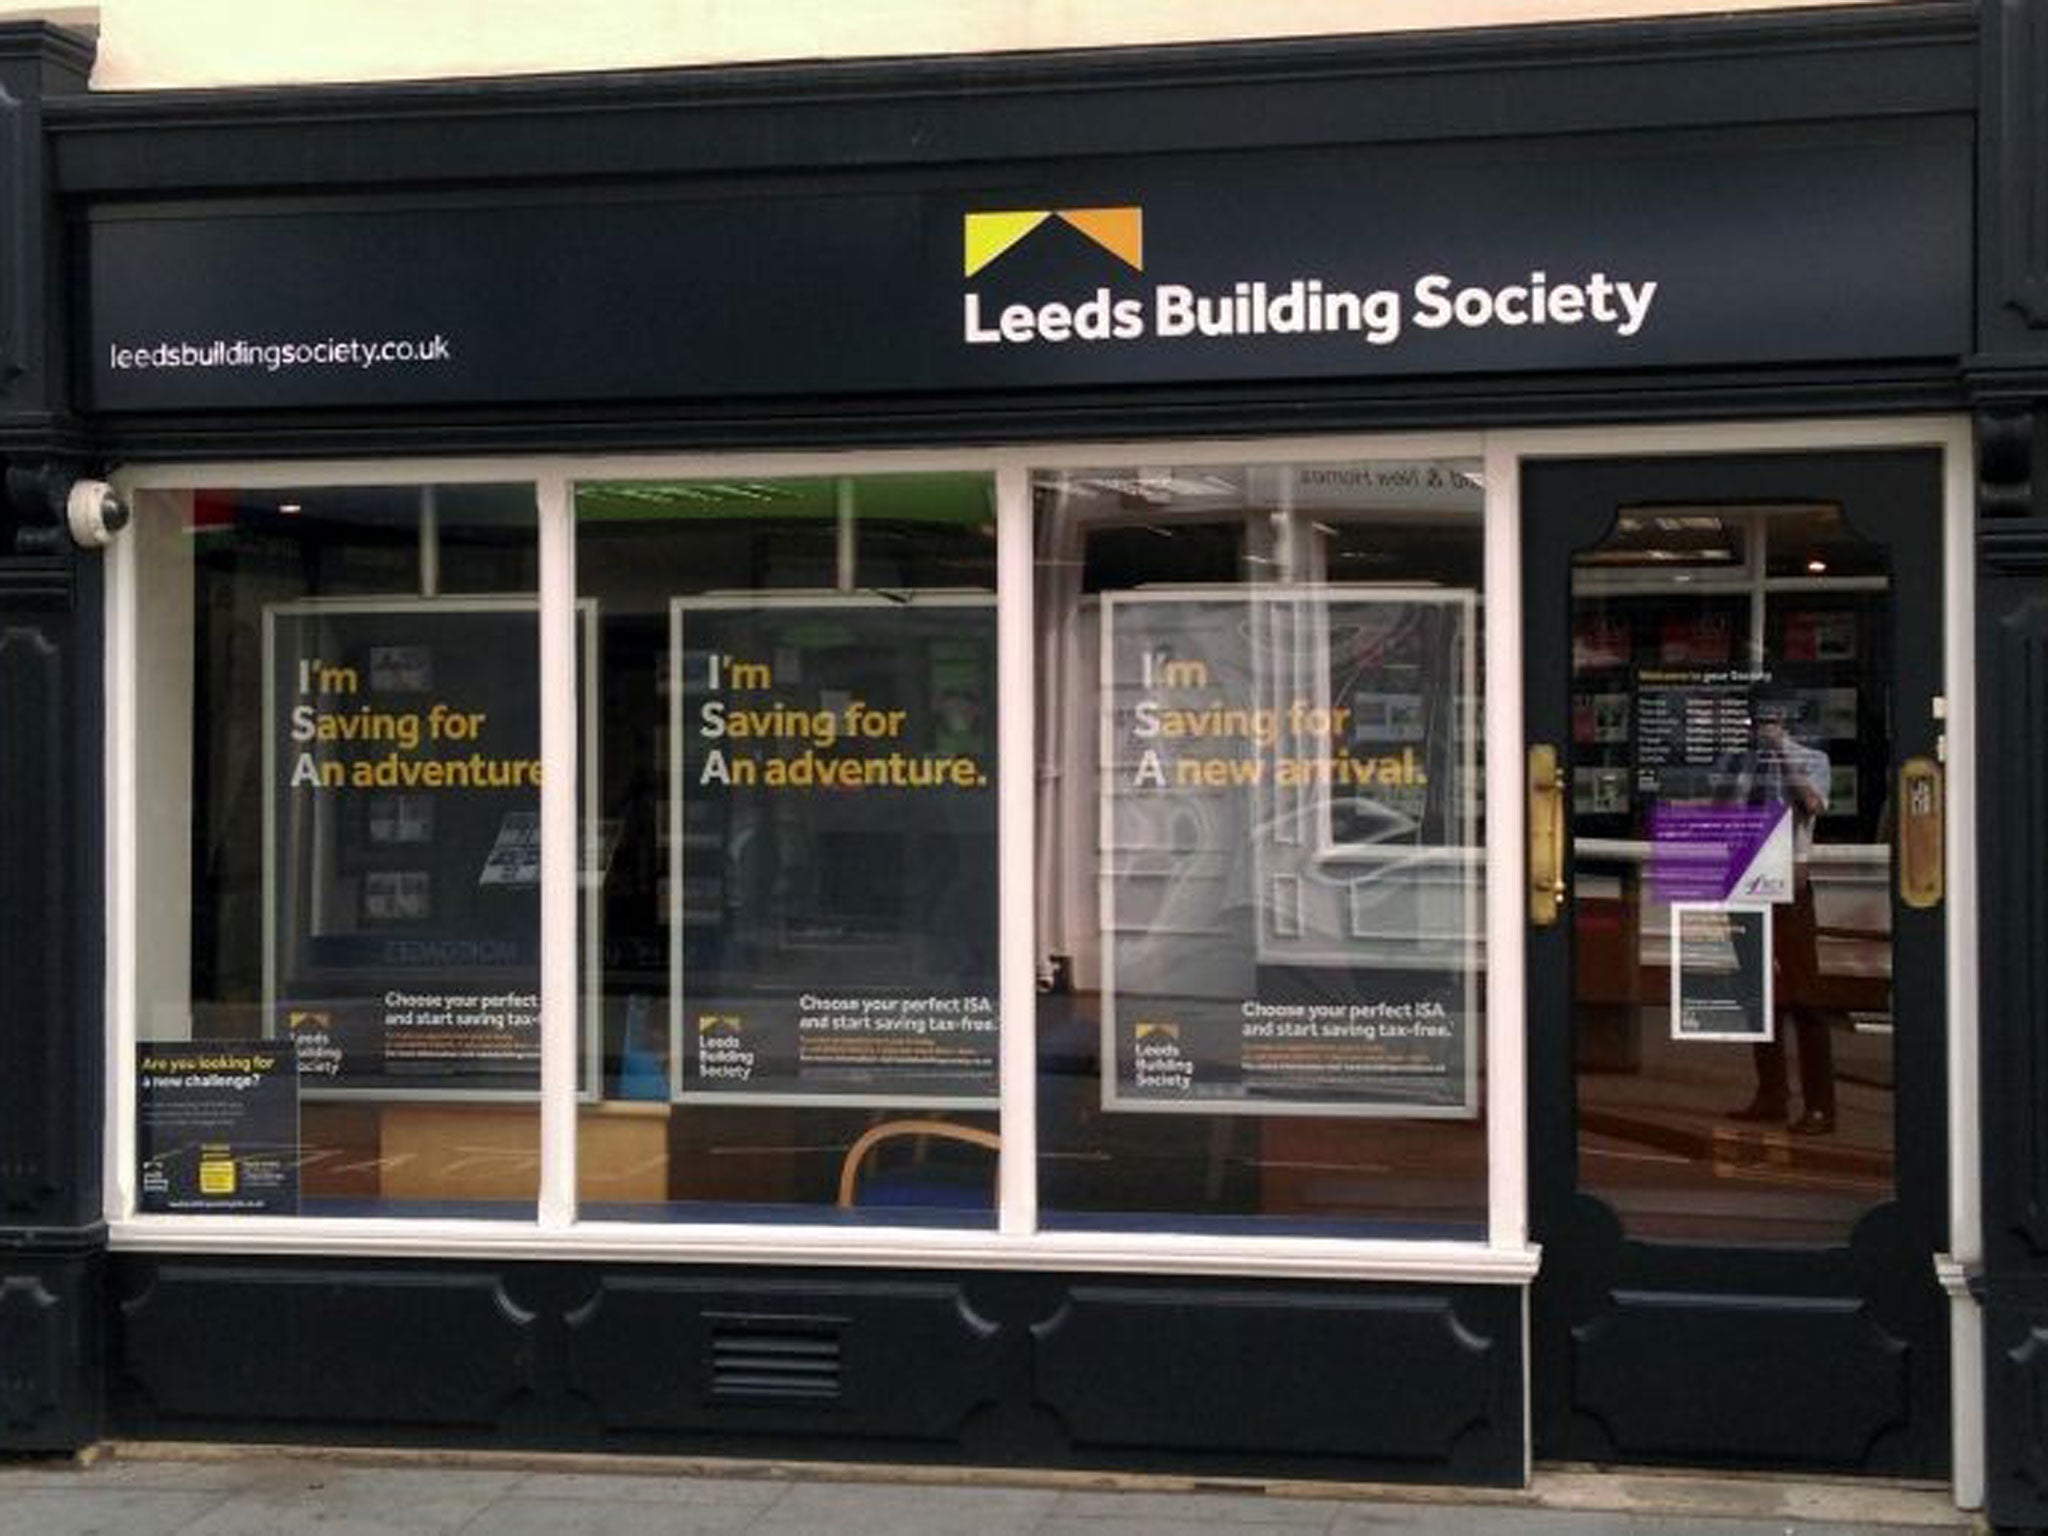 A part capital and part interest-only home loan, says the Leeds society, is attracting demand from remortgage borrowers